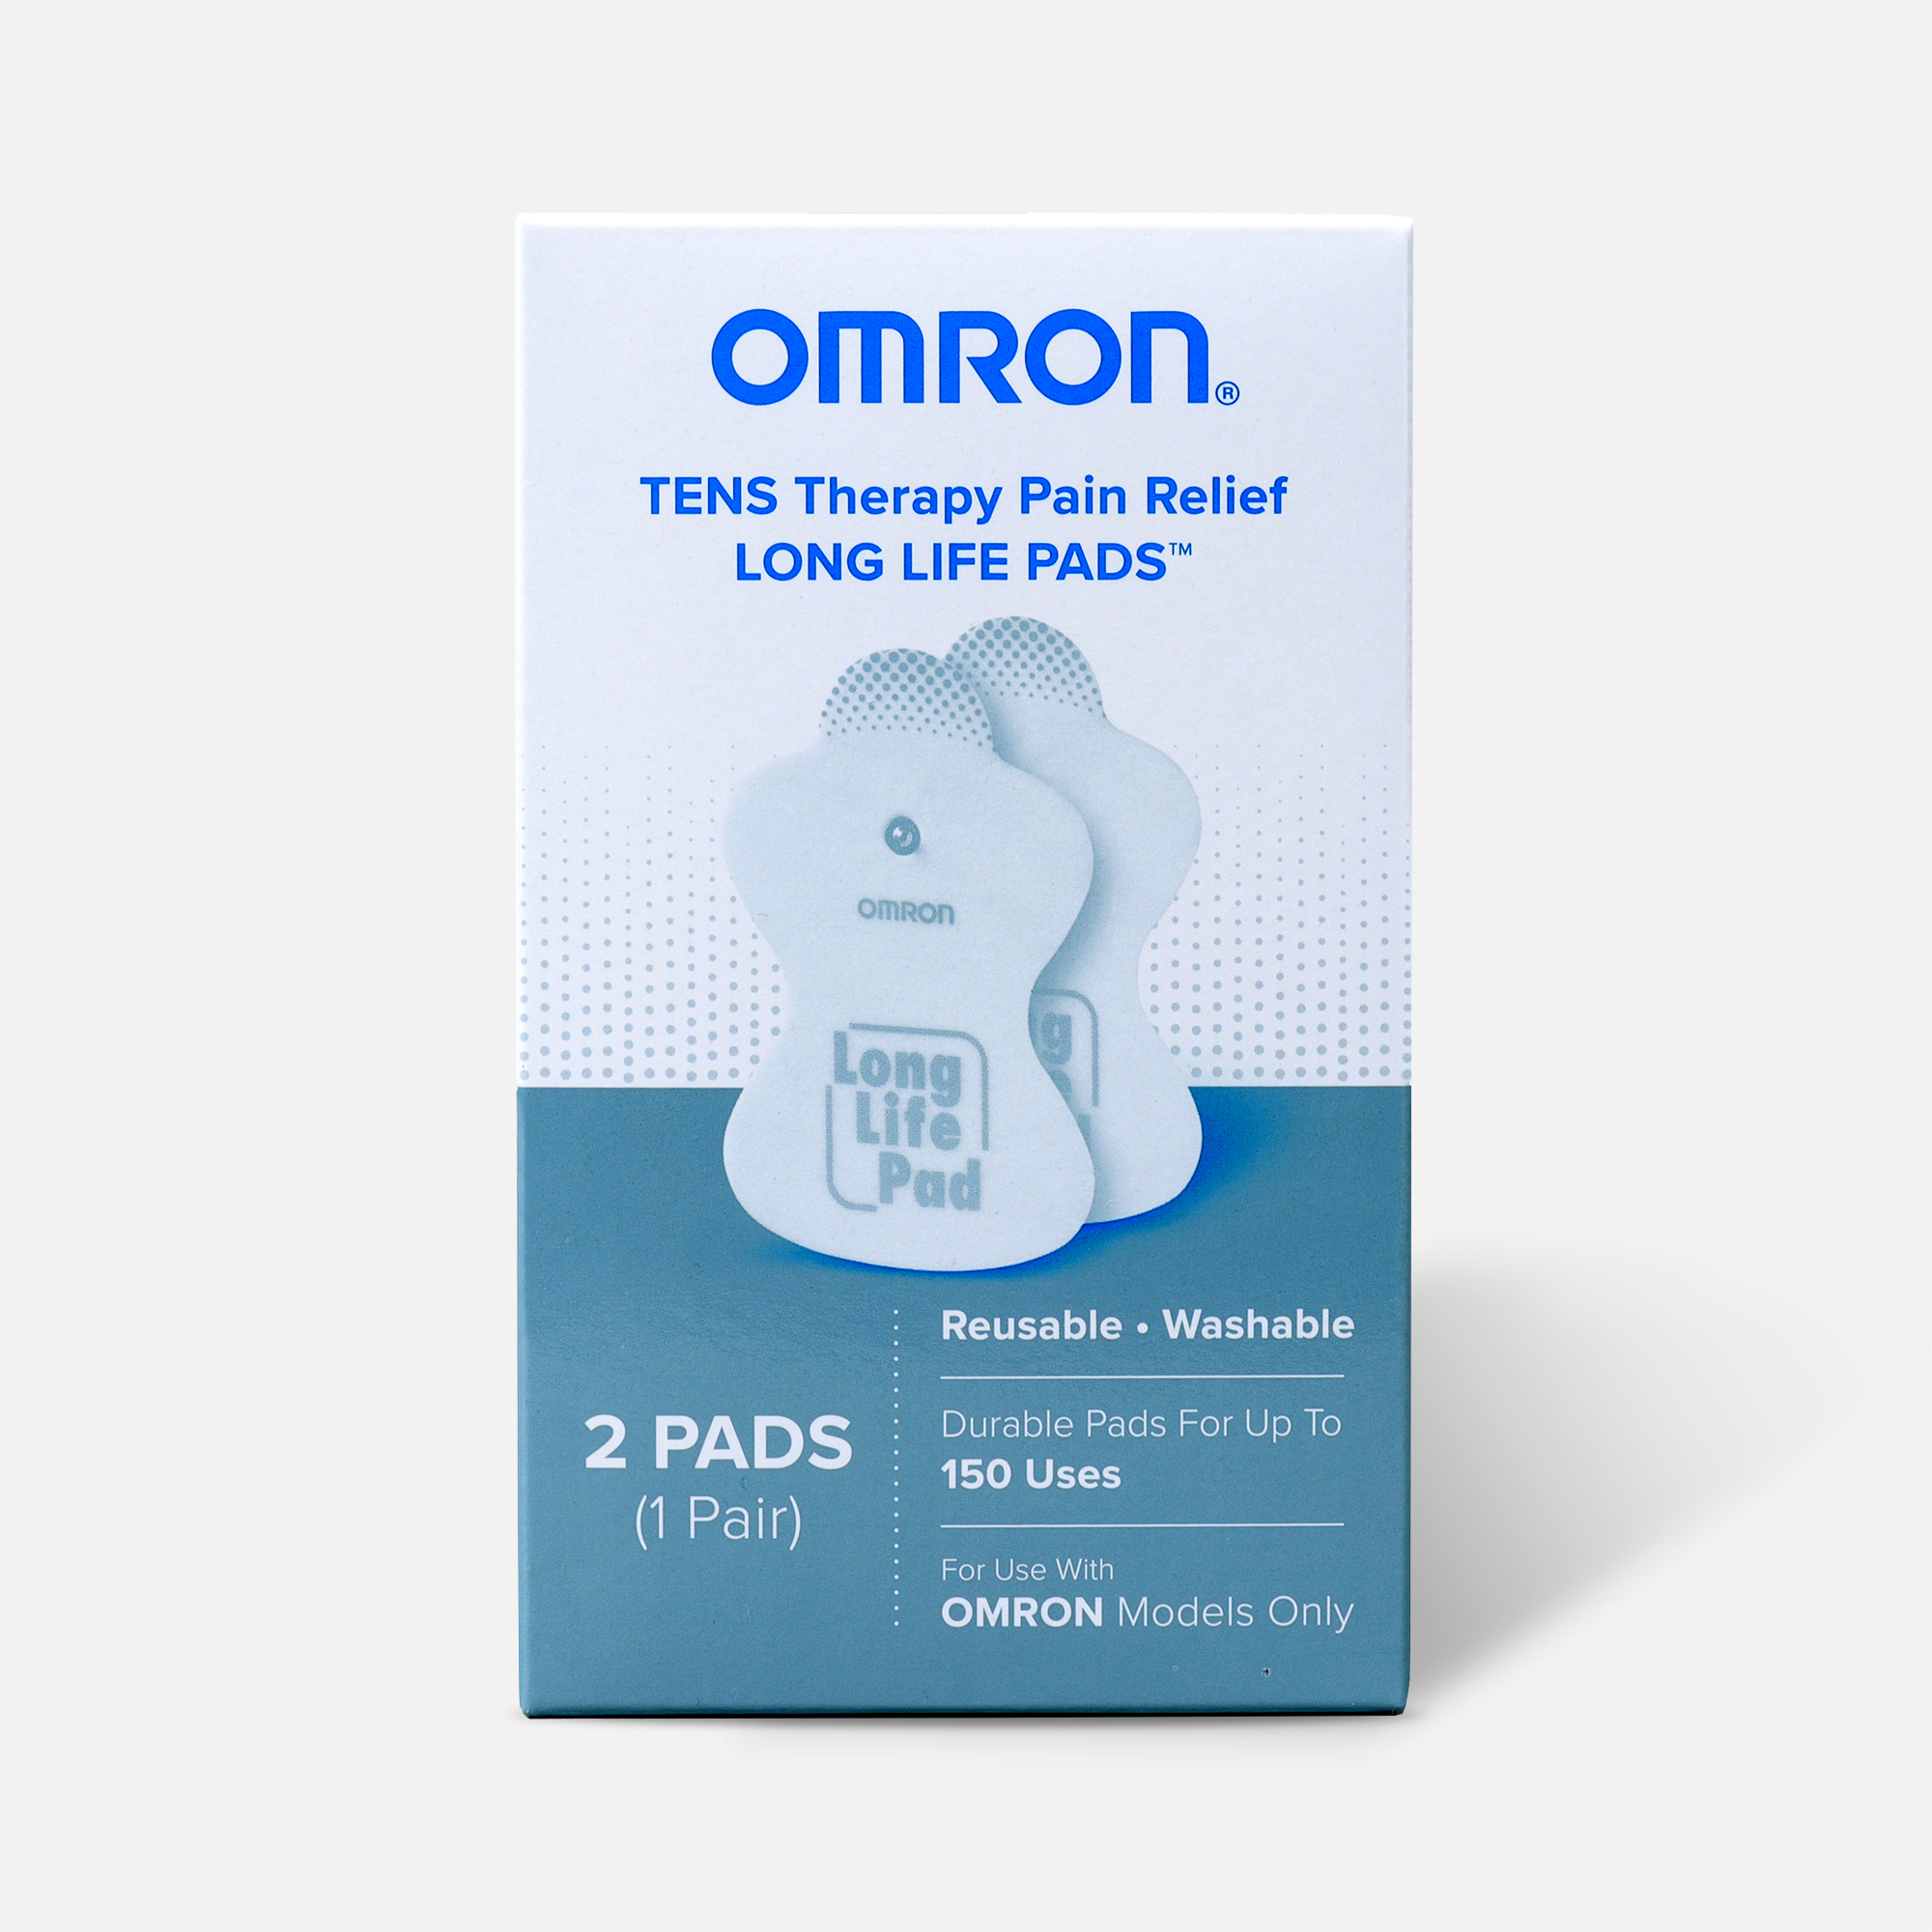 10 Pcs Durable Compatible with Omron Tens Unit Replacement Pads,5Pairs Replacement  Electrotherapy Pads